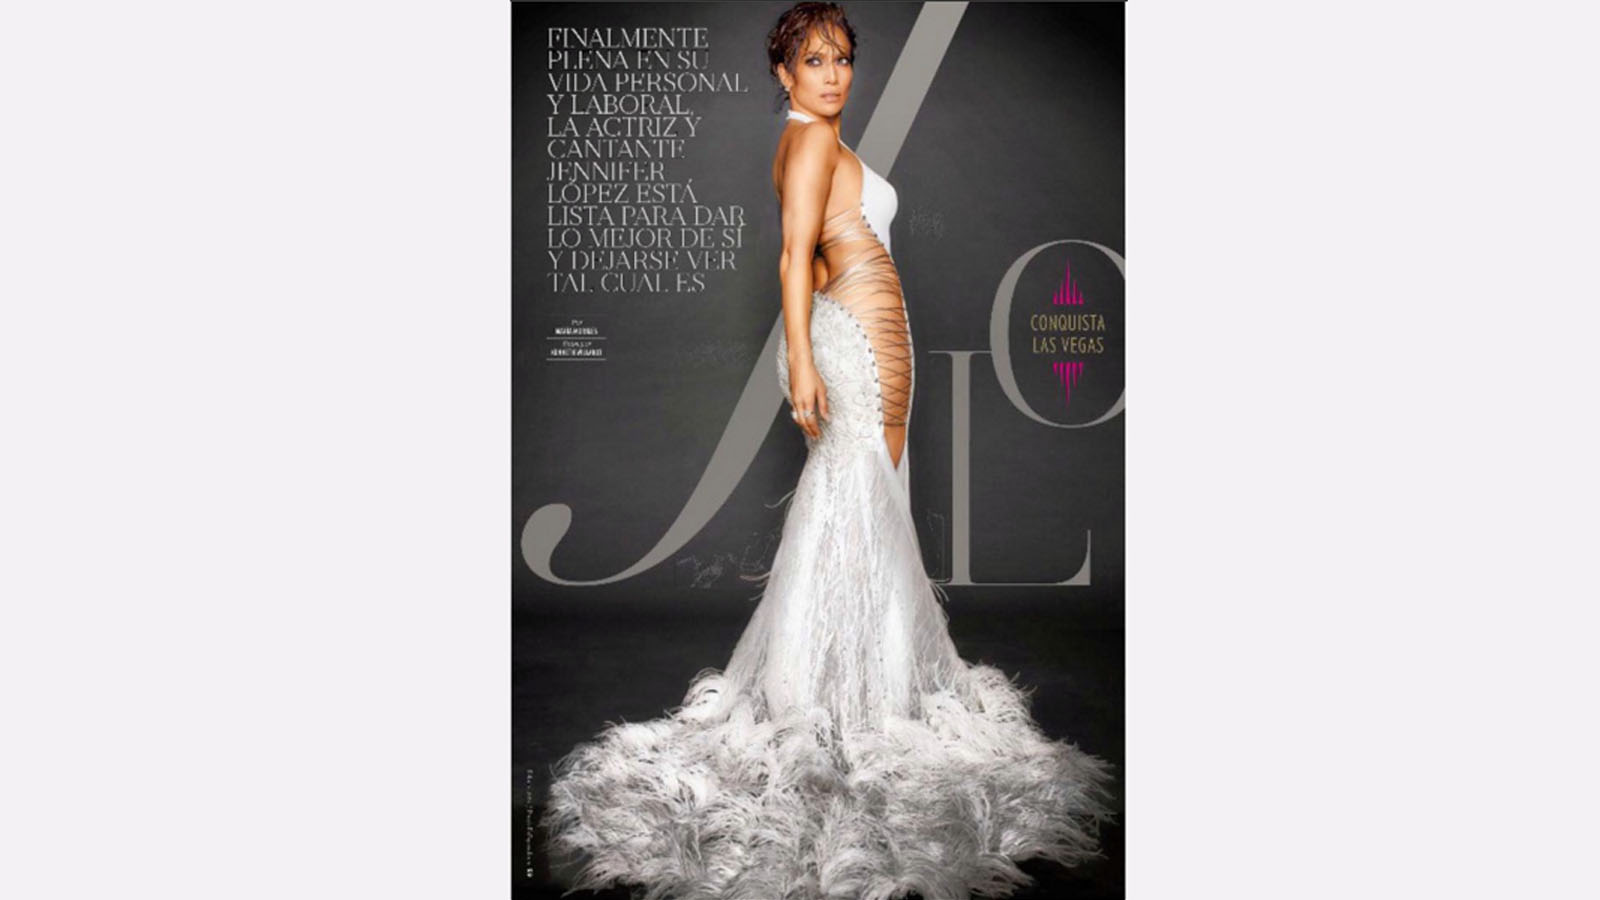 Jennifer Lopez wears an exclusive dress by Israeli designer Galia Lahav on cover of People Magazine. Photo from Facebook